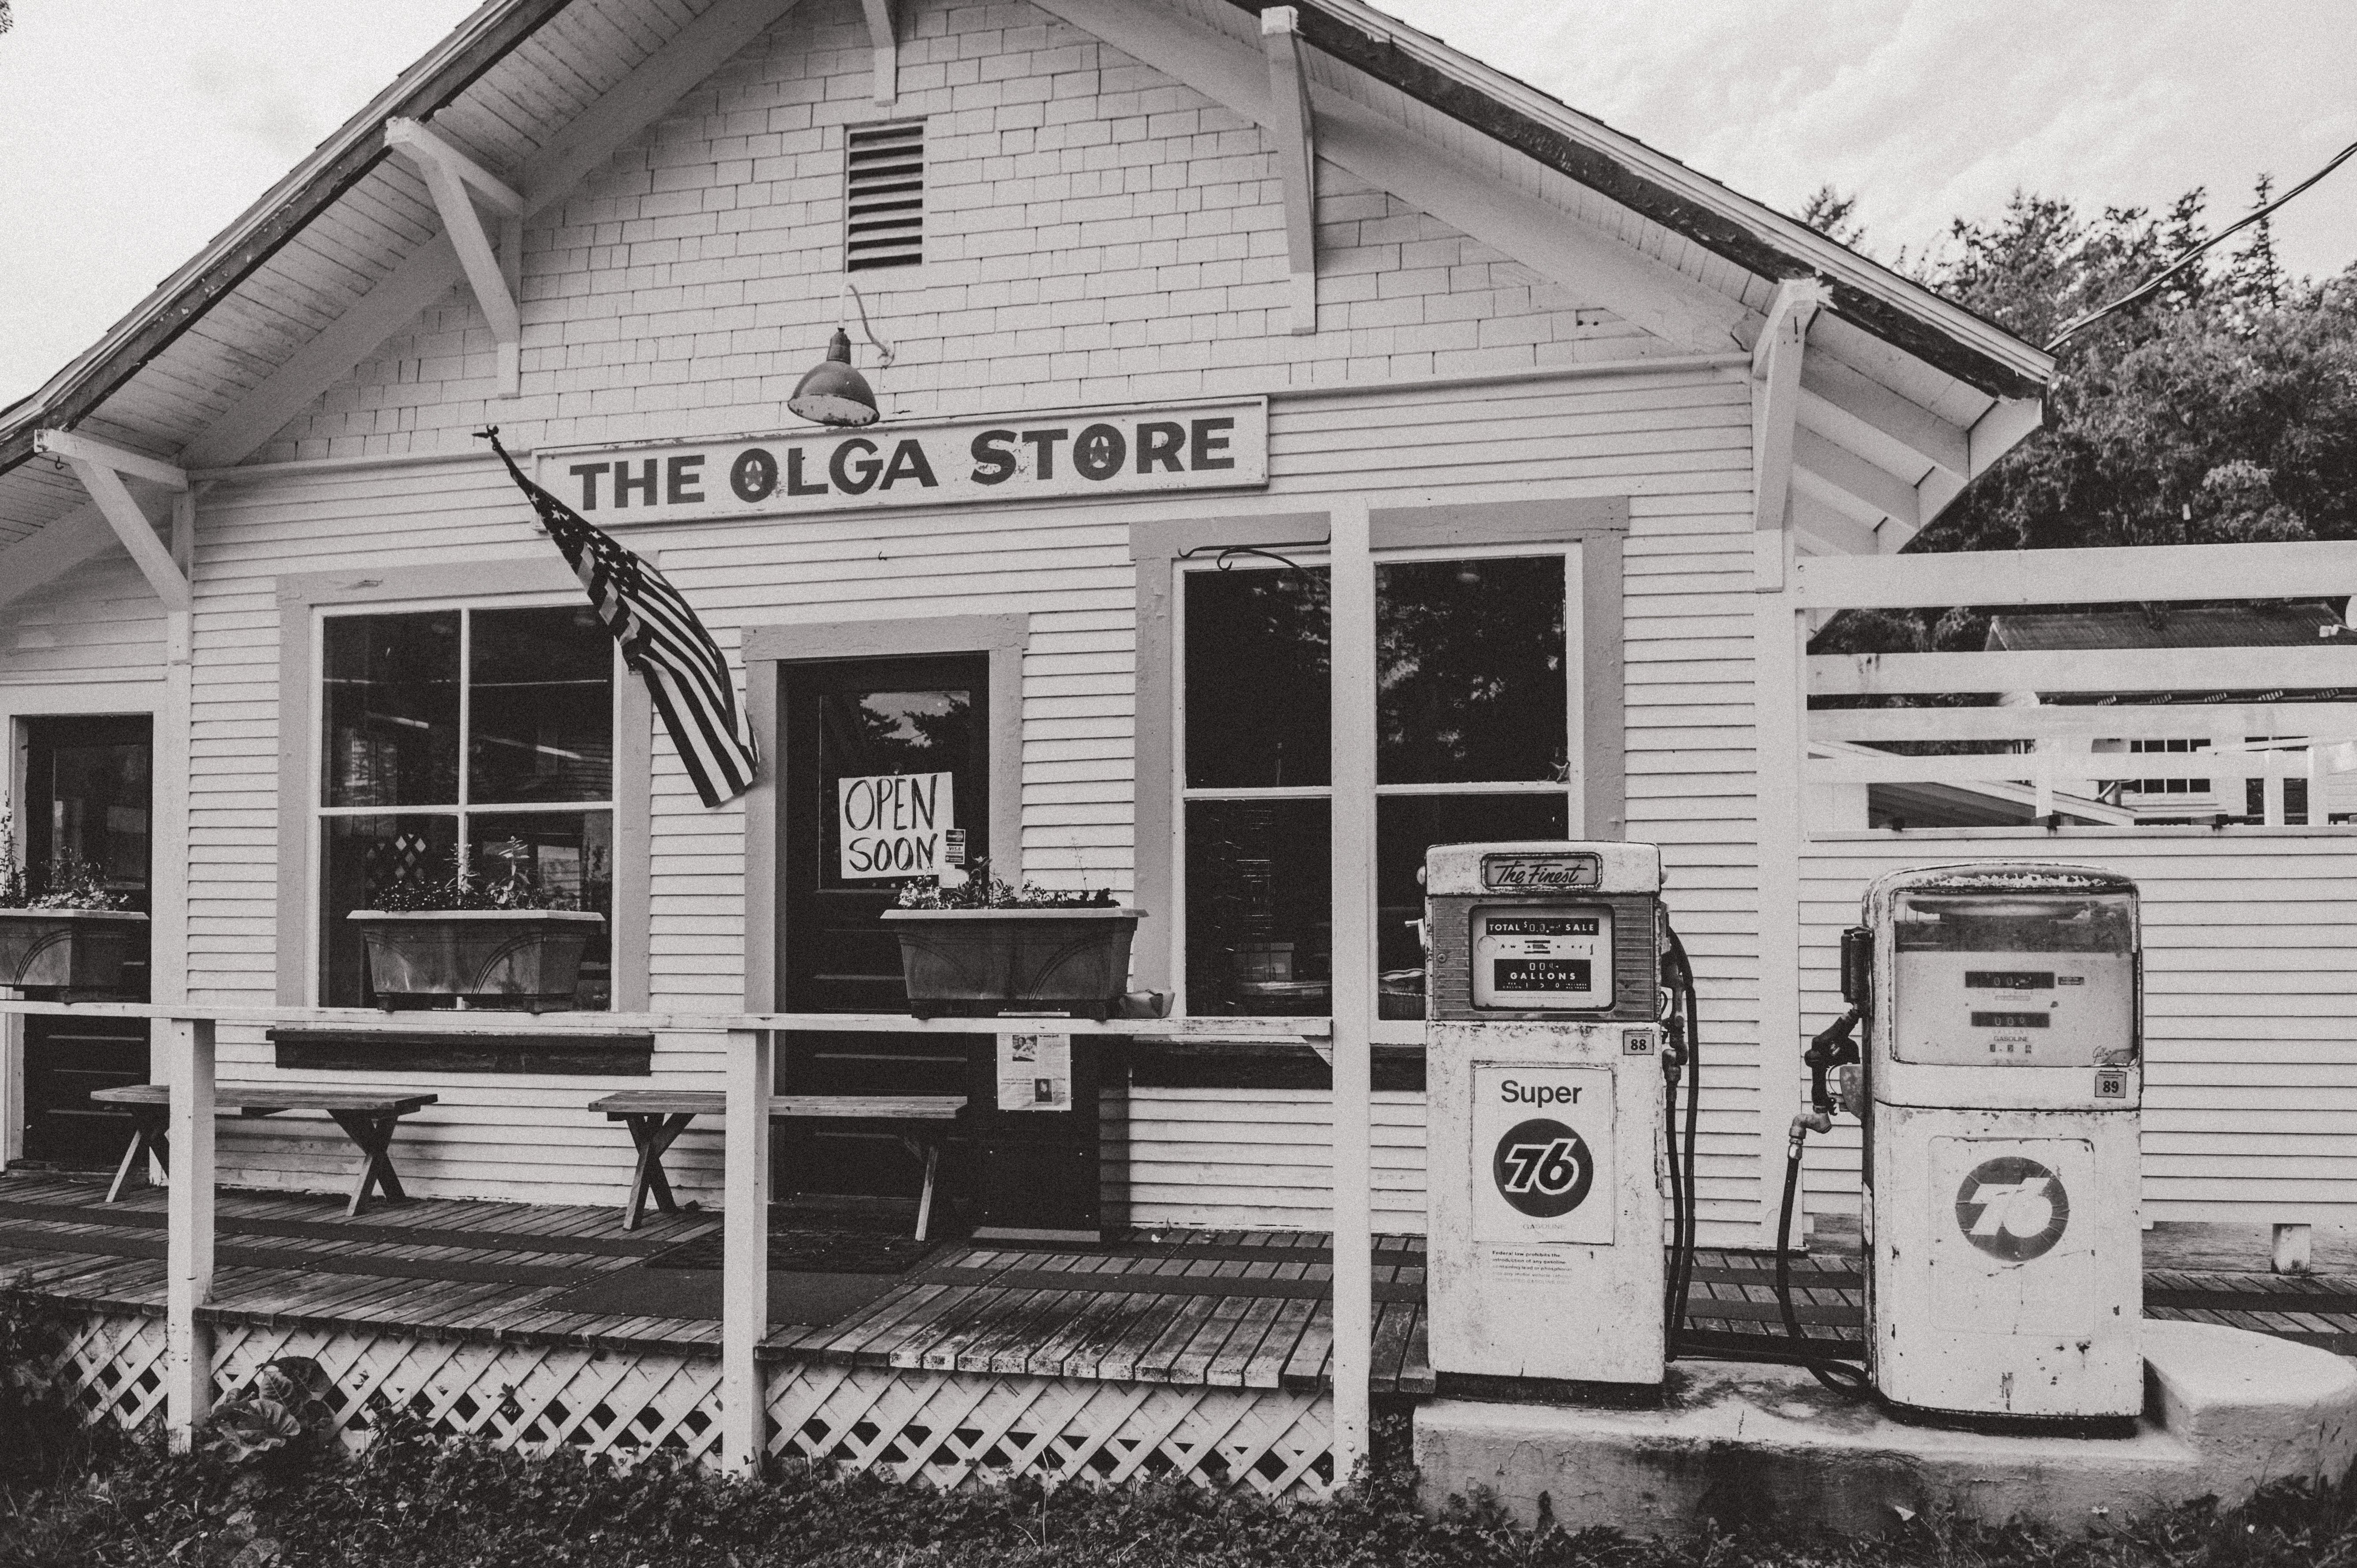 The Olga Store - Notice the Space